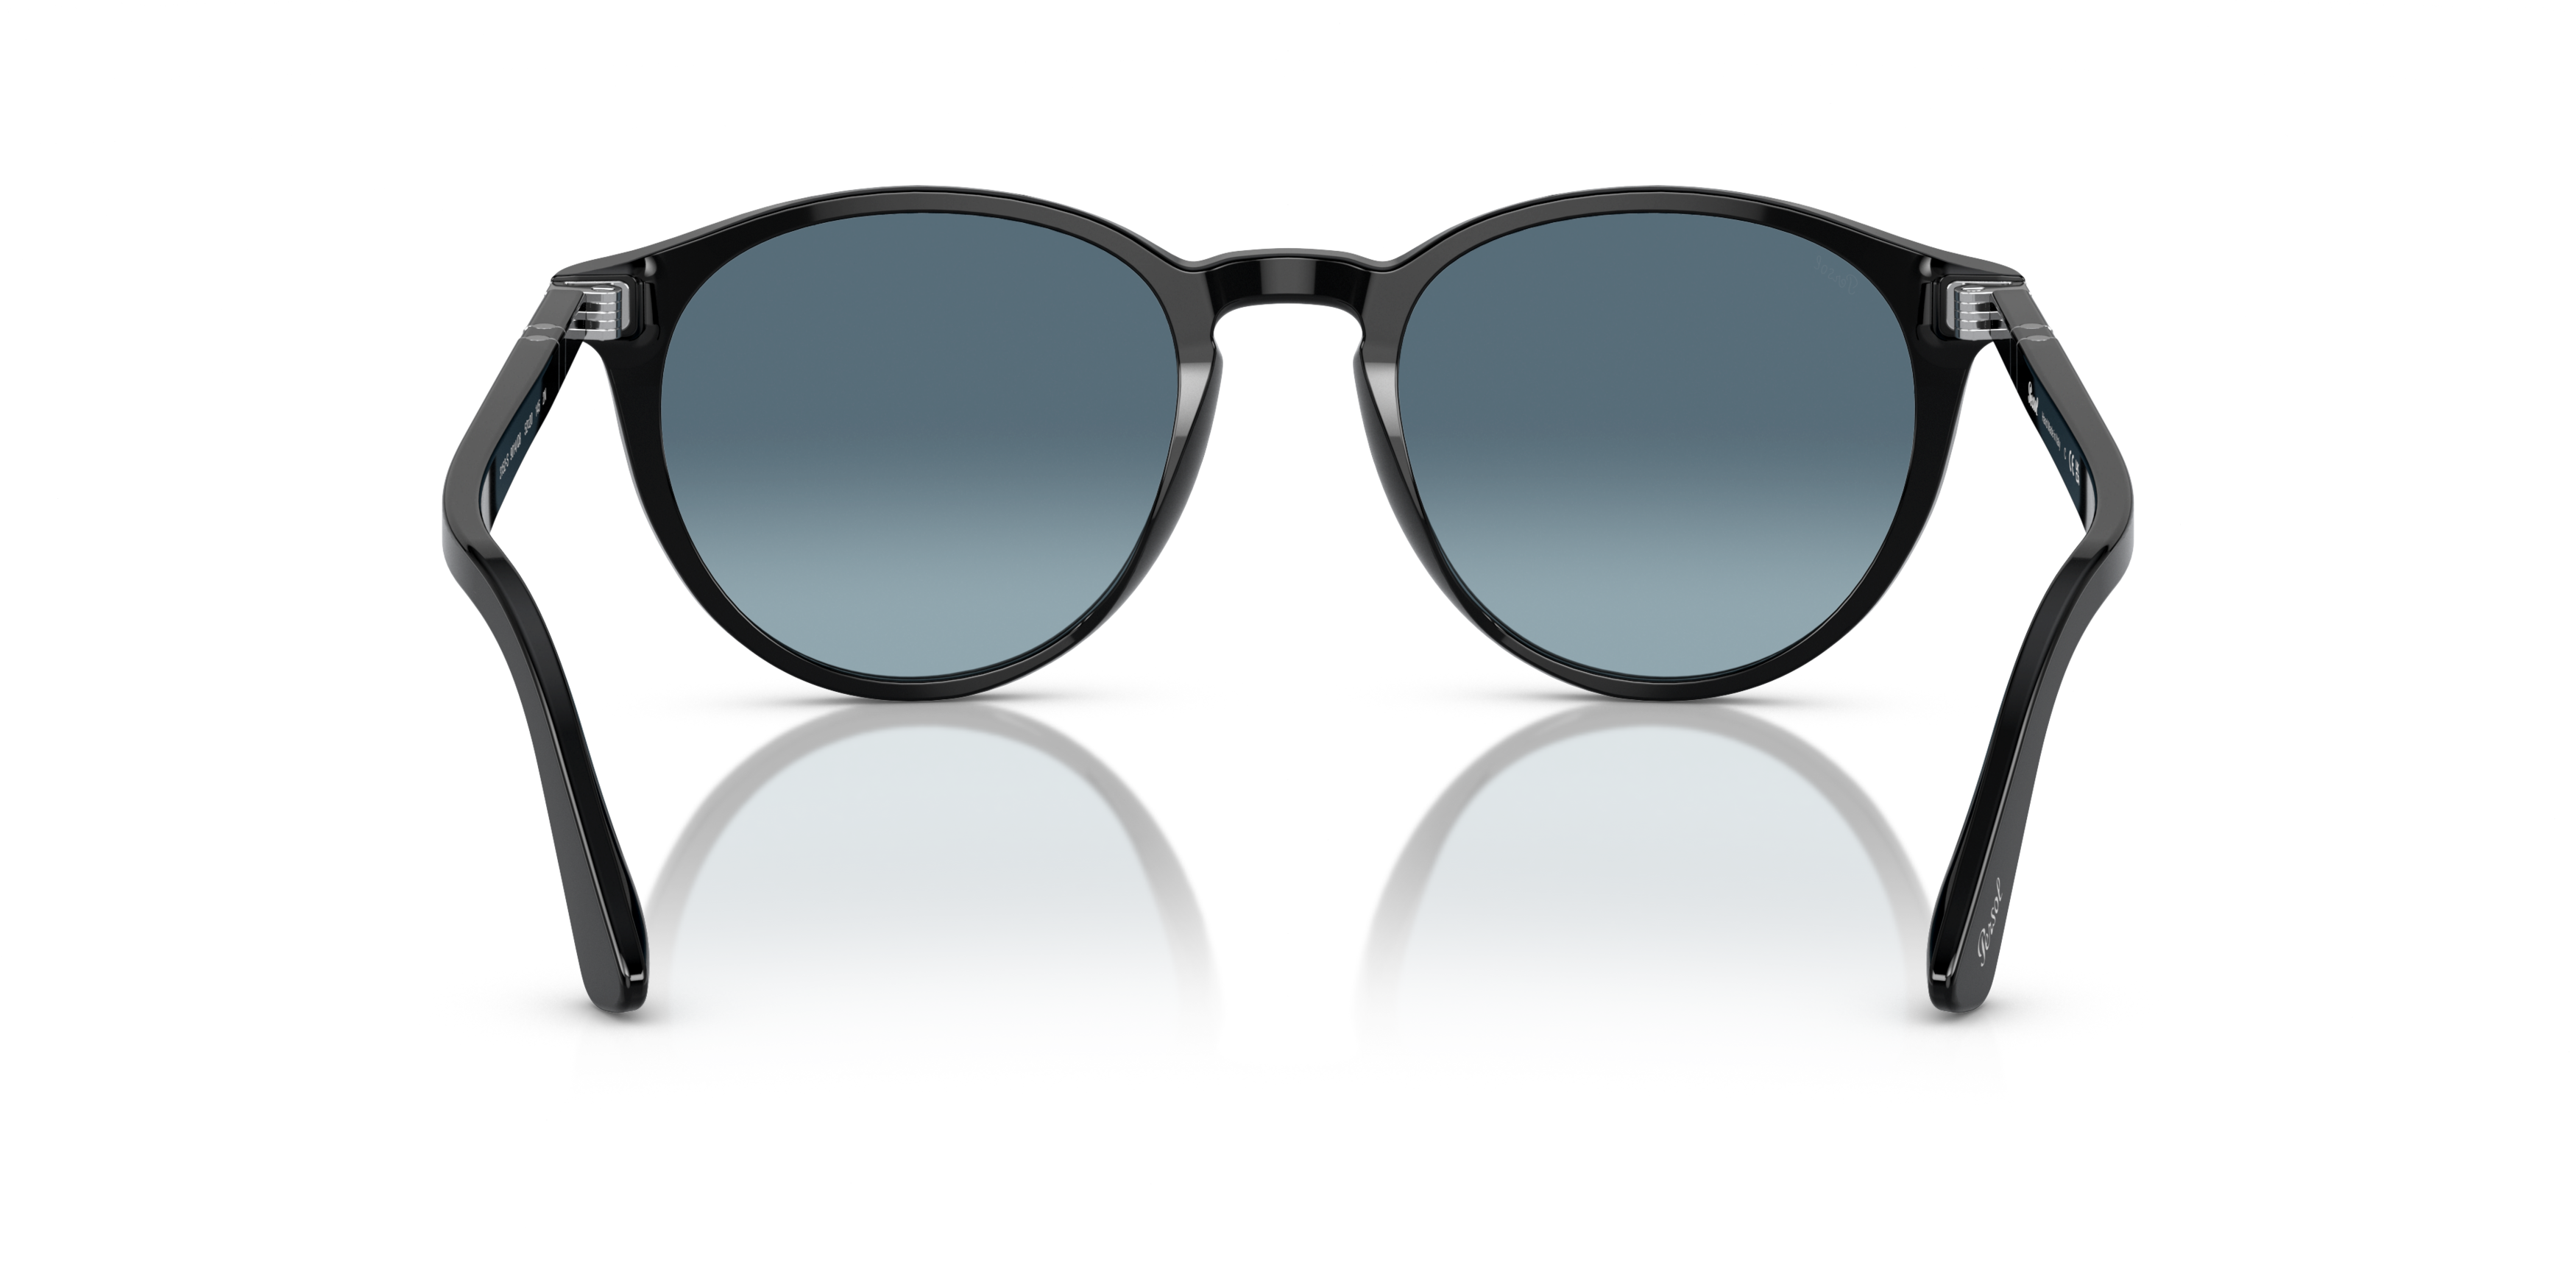 [products.image.detail02] Persol PO3152S 9014Q8